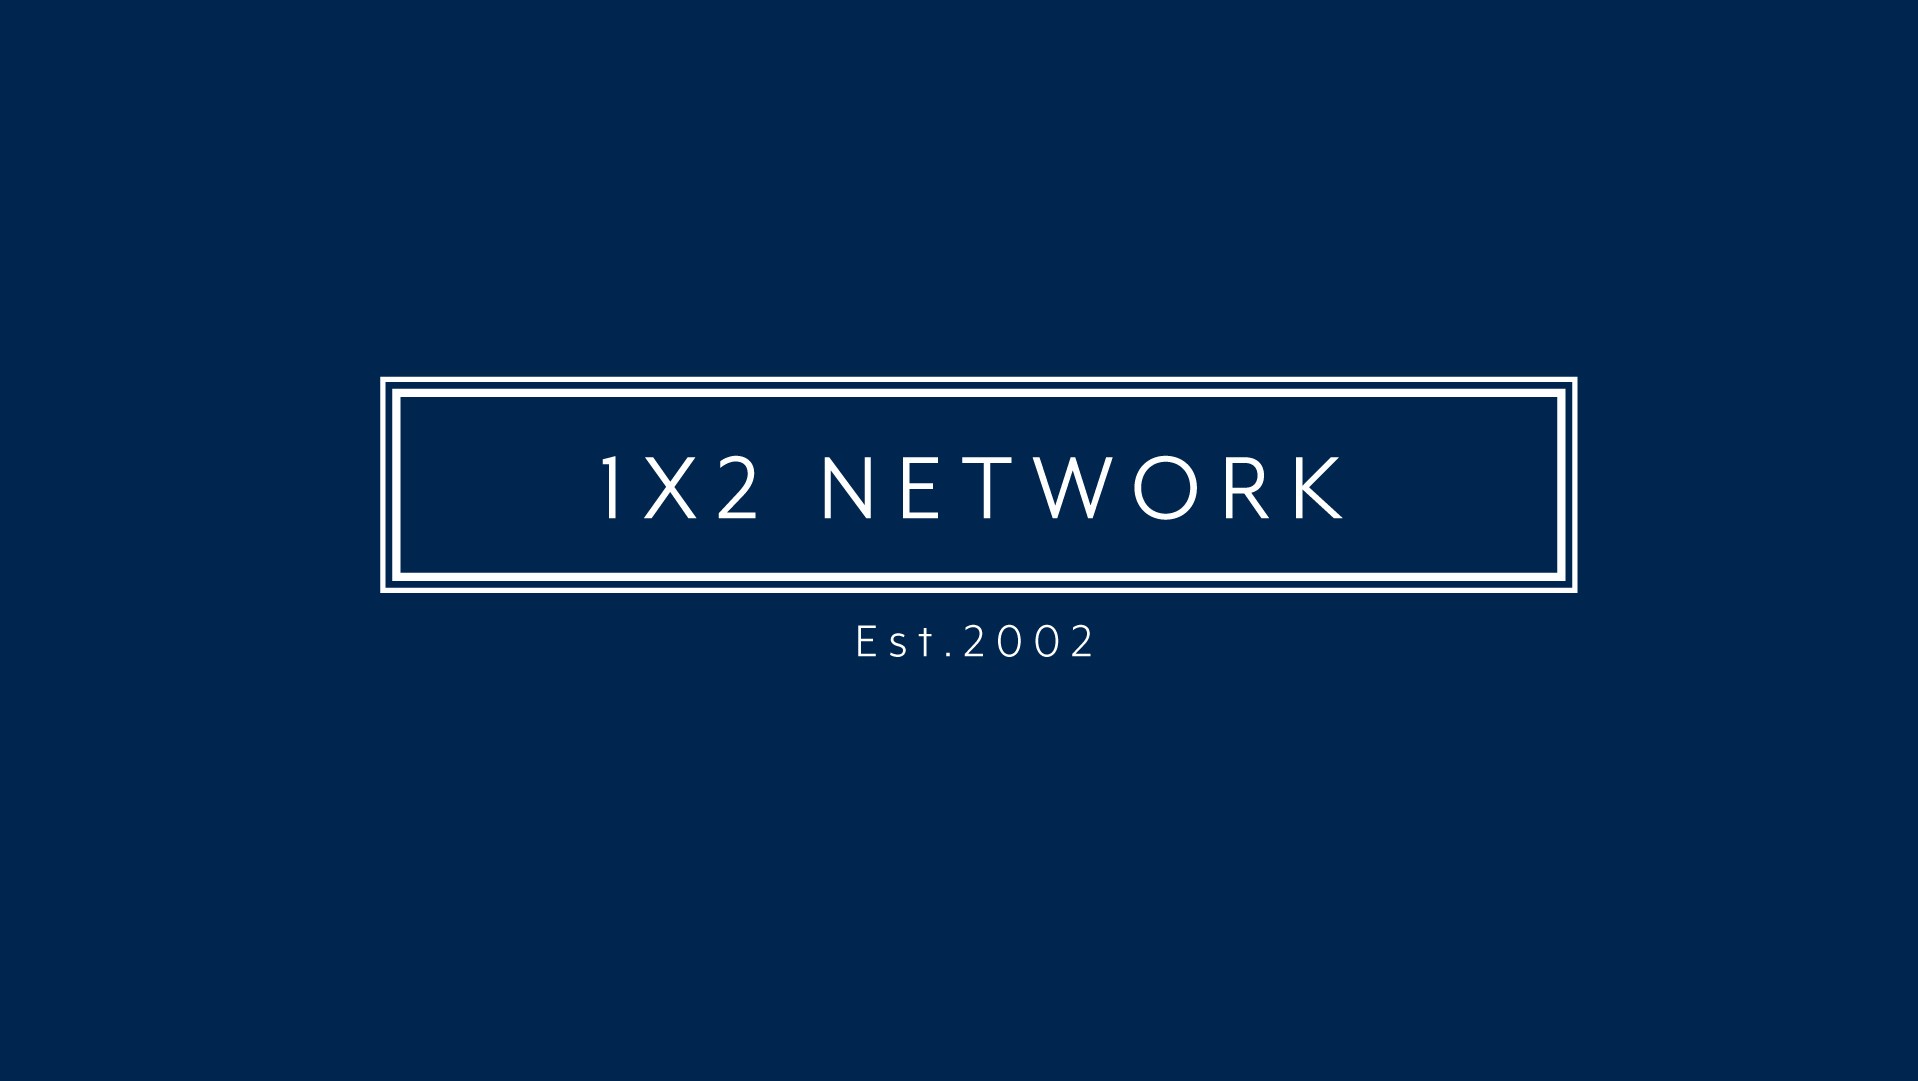 1x2 Network gains ISO certification